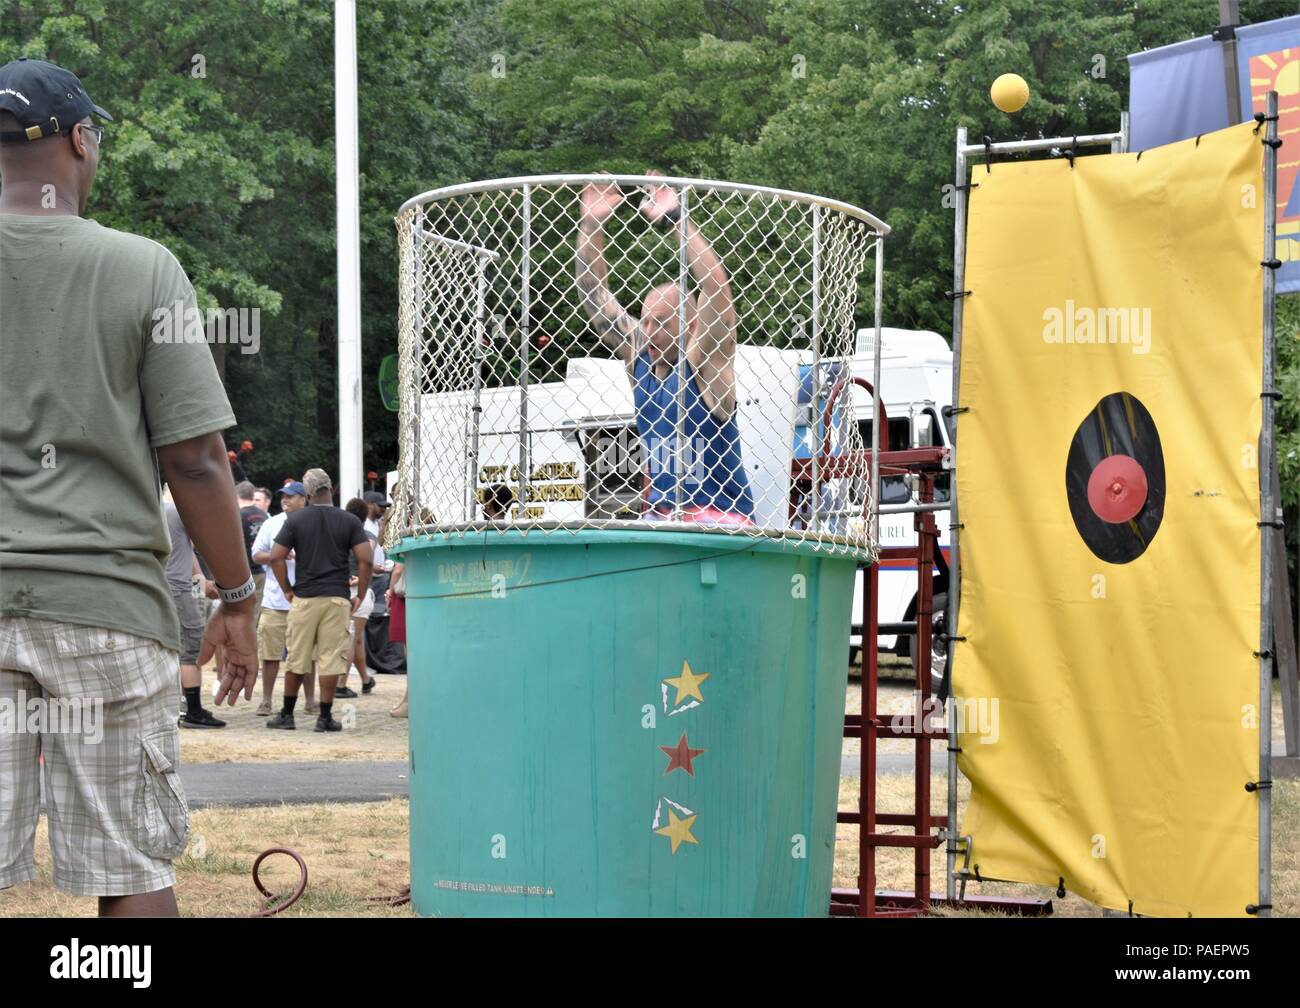 U.S. Maryland Army National Guard (MDARNG) 629th Military Intelligence Battalion, 58th Expeditionary Military Intelligence Brigade (EMIB) celebrated their 1st annual organizational day at Granville Gude Park in Laurel, MD, on July 15, 2018. Stock Photo